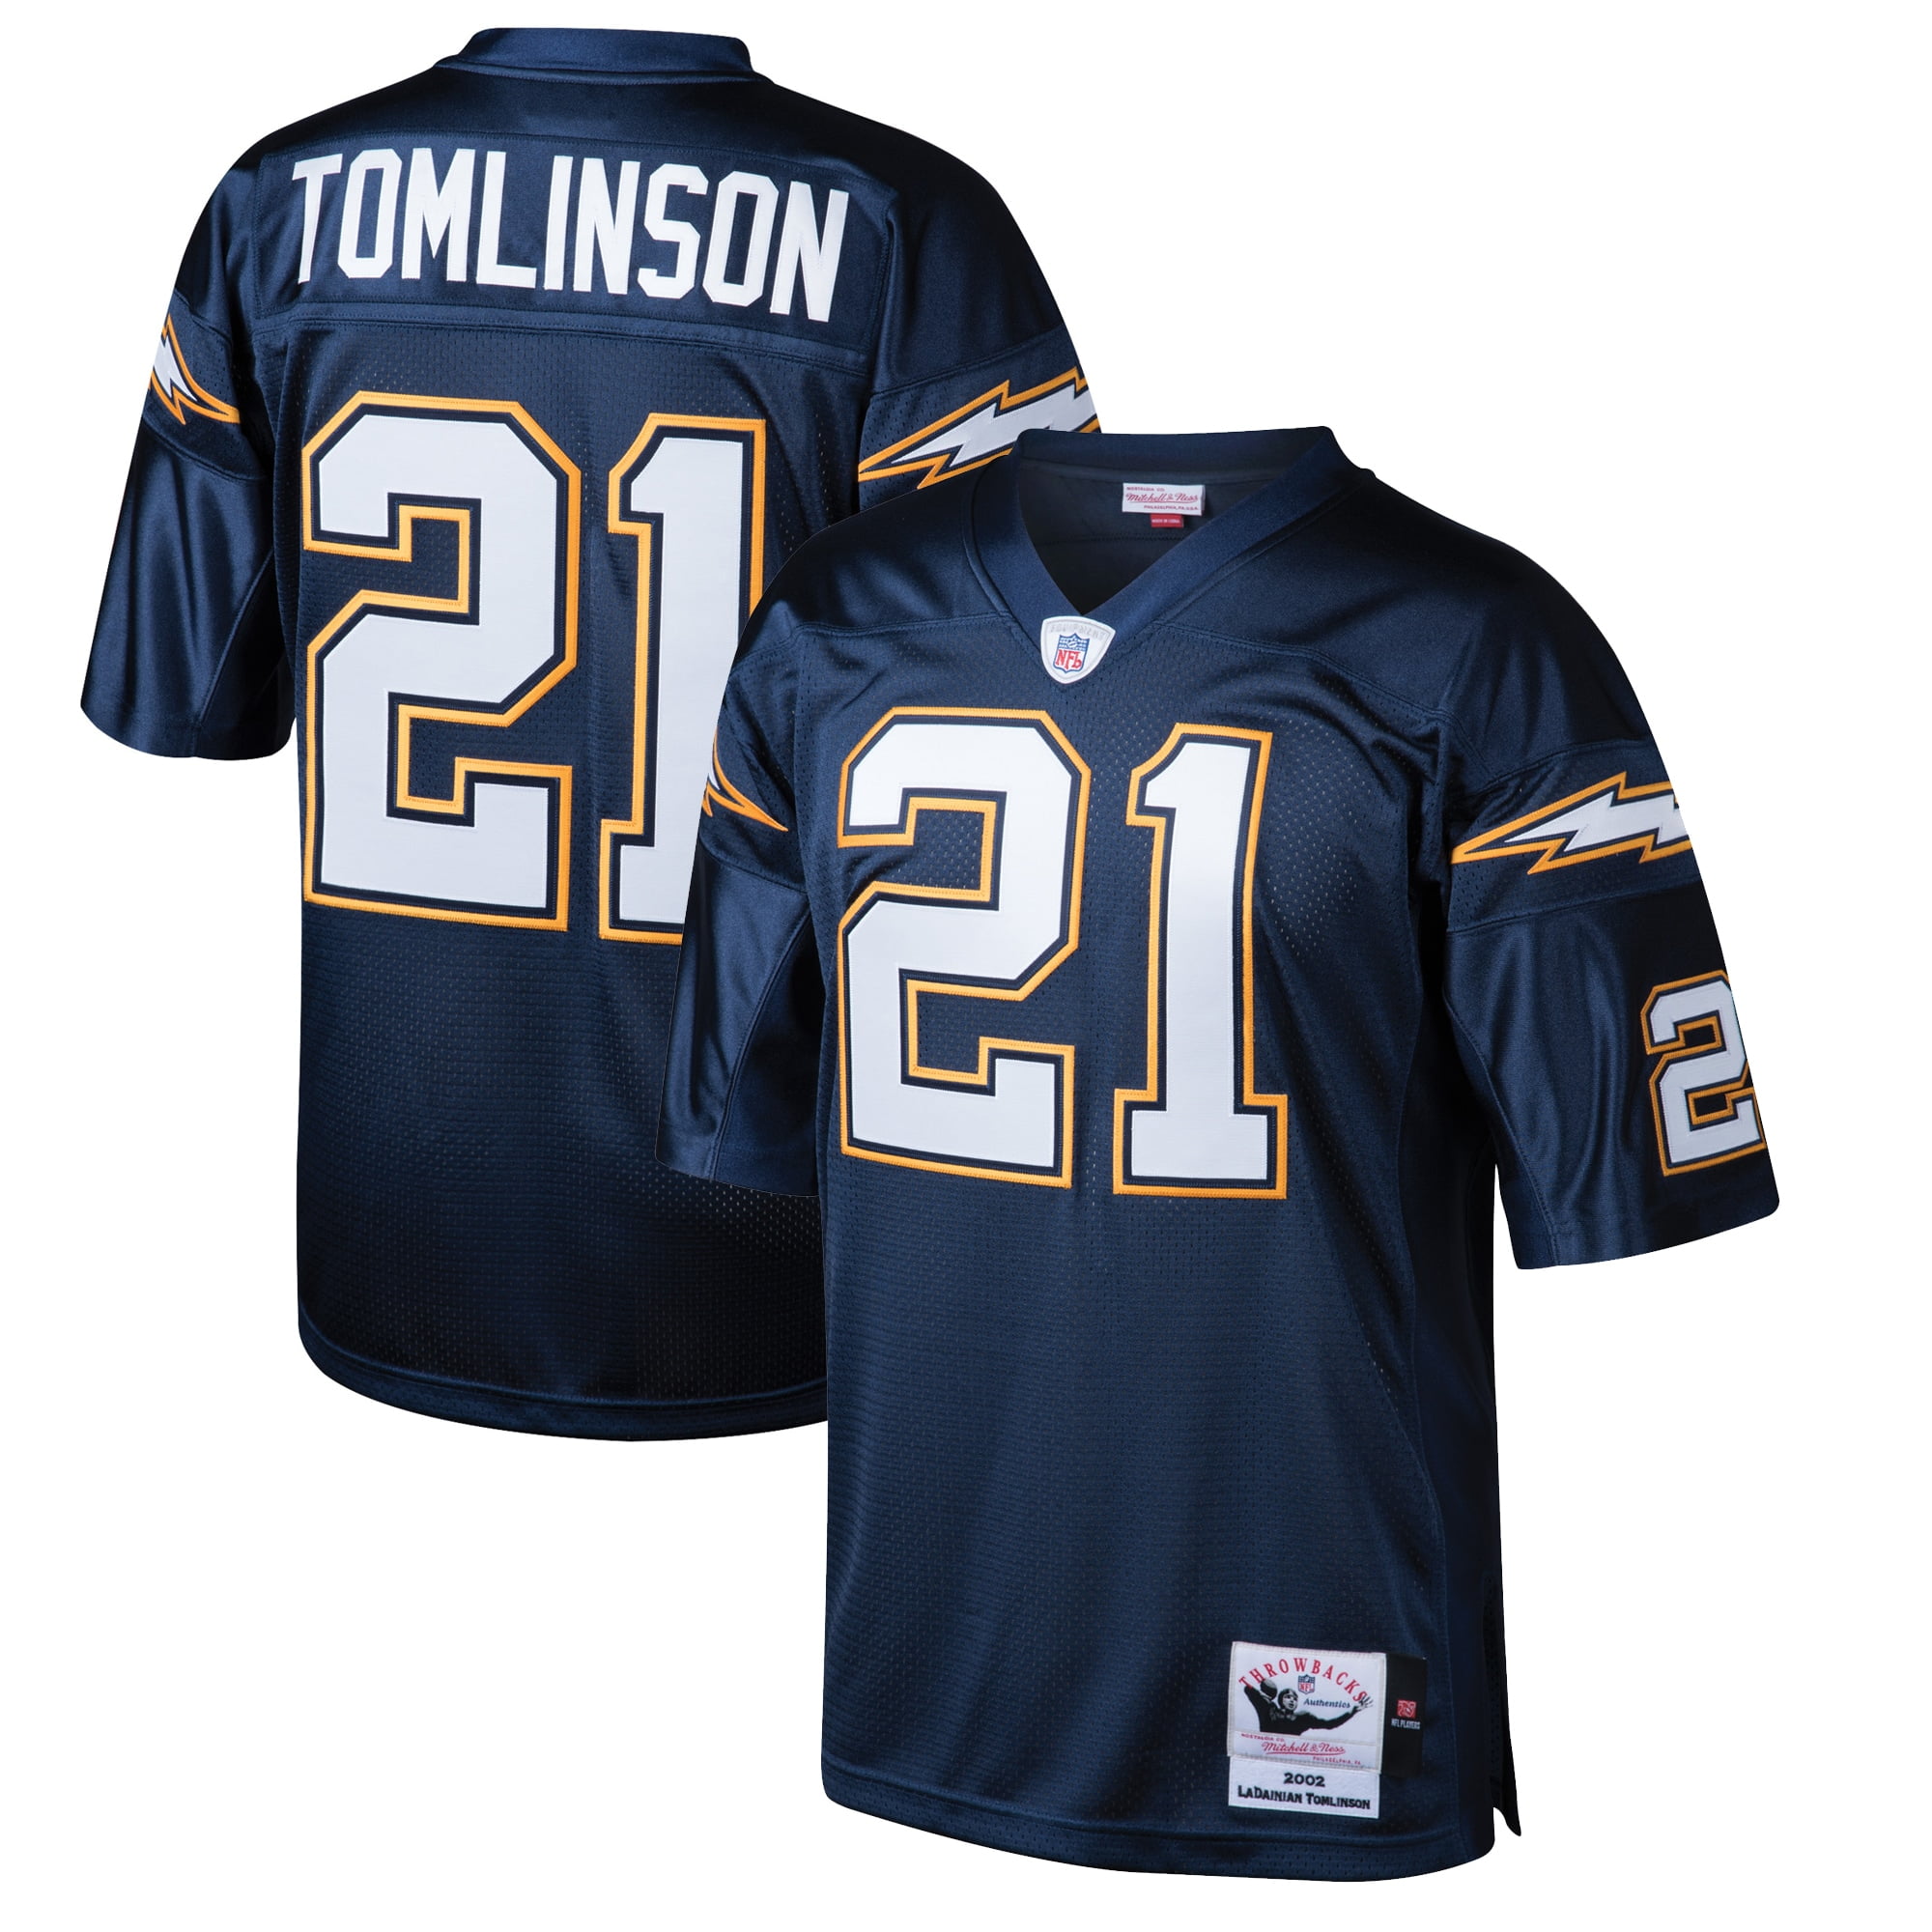 San Diego Chargers Throwback Authentic 